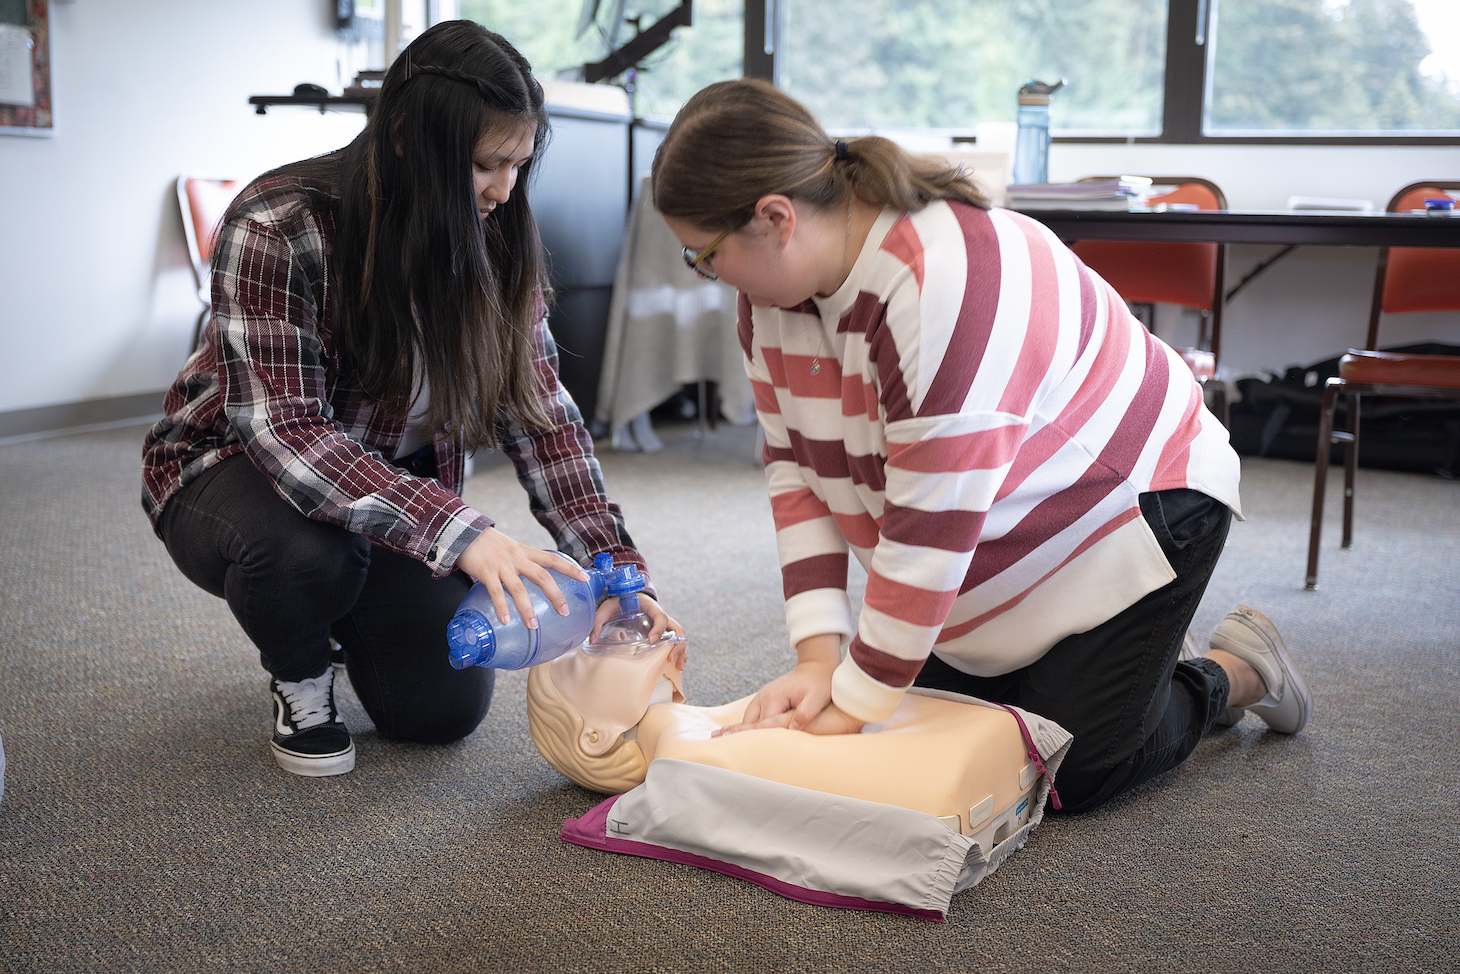 Students doing CPR